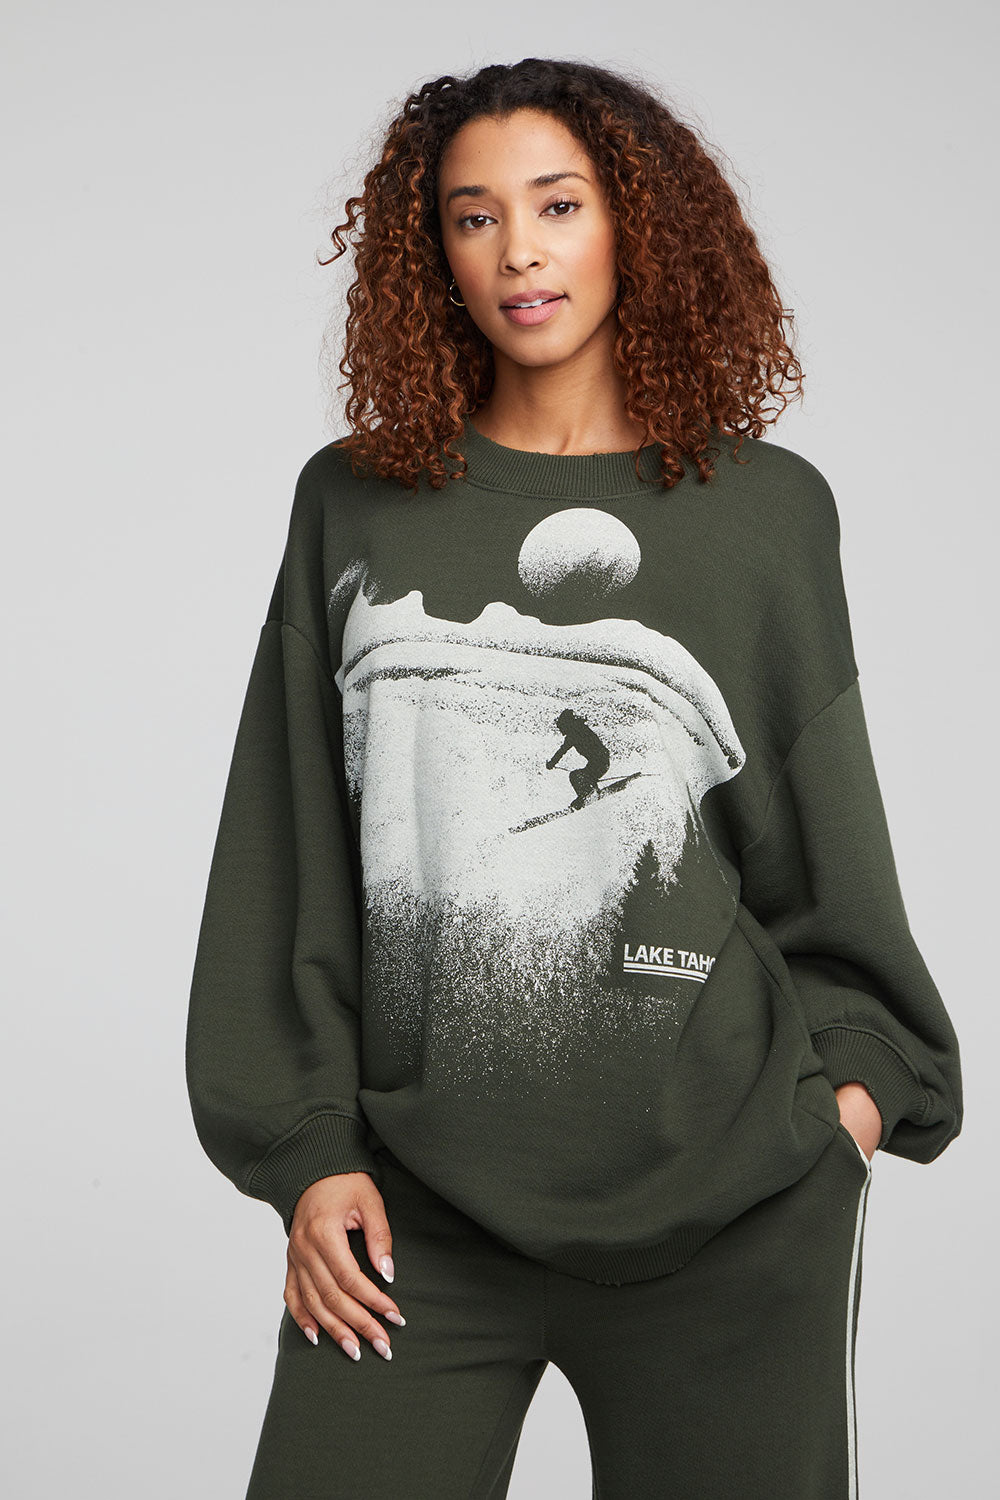 Tahoe Ski Slope Zuma Cotton Pullover WOMENS chaserbrand